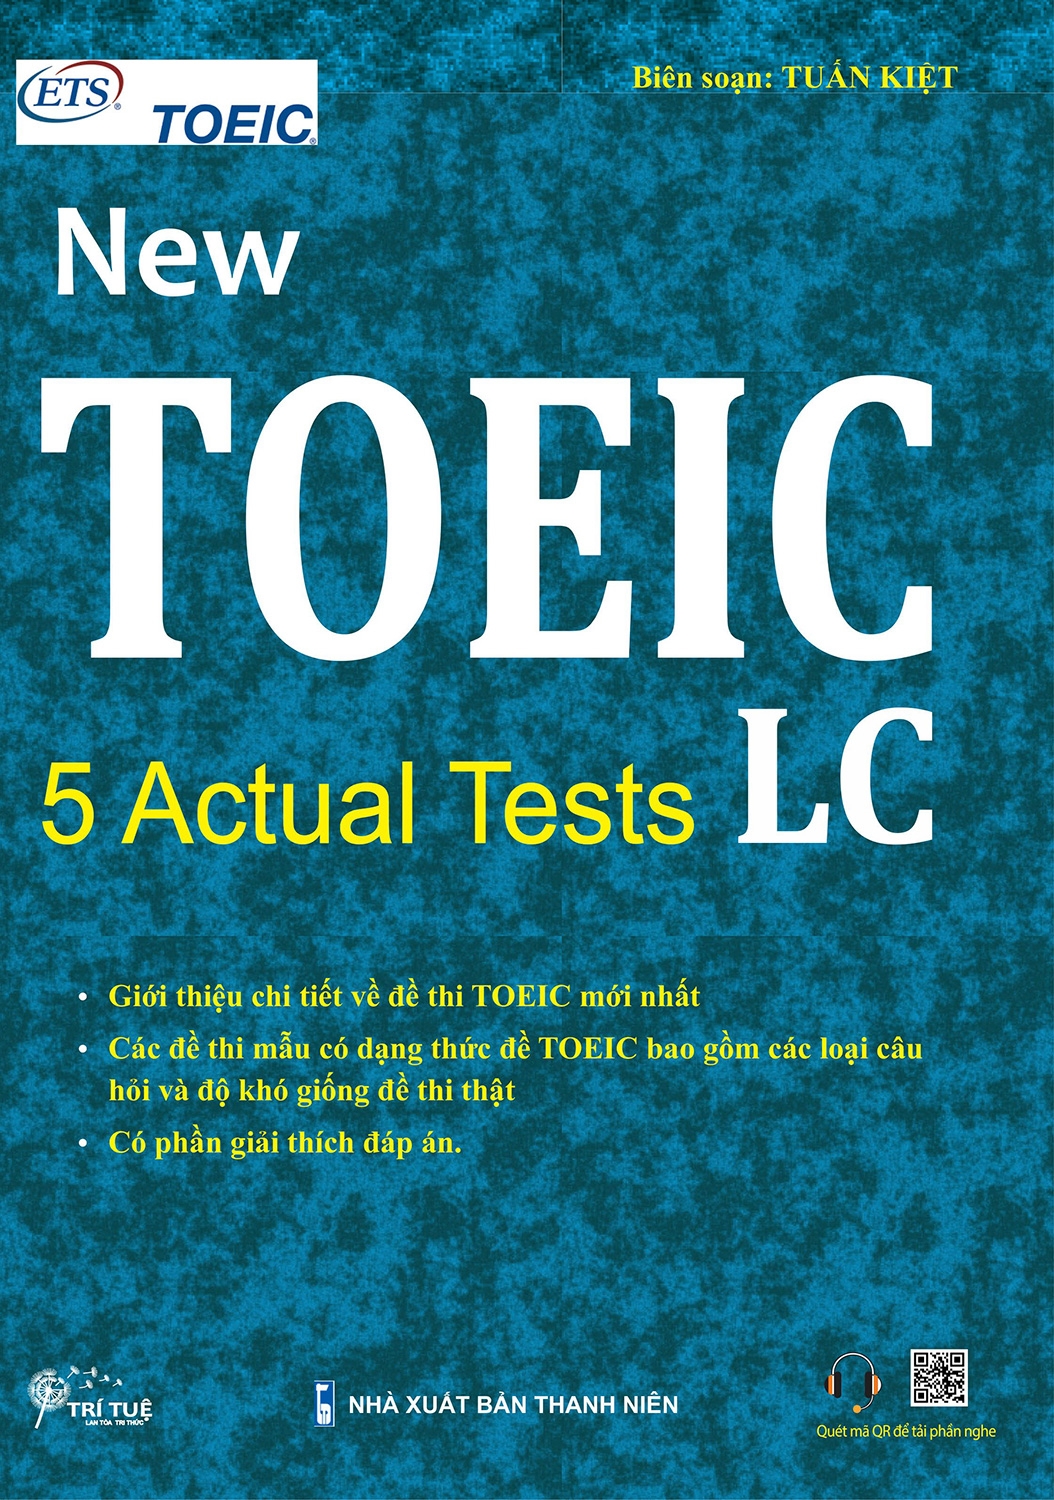 New Toeic - 5 Actual Tests - LC PDF